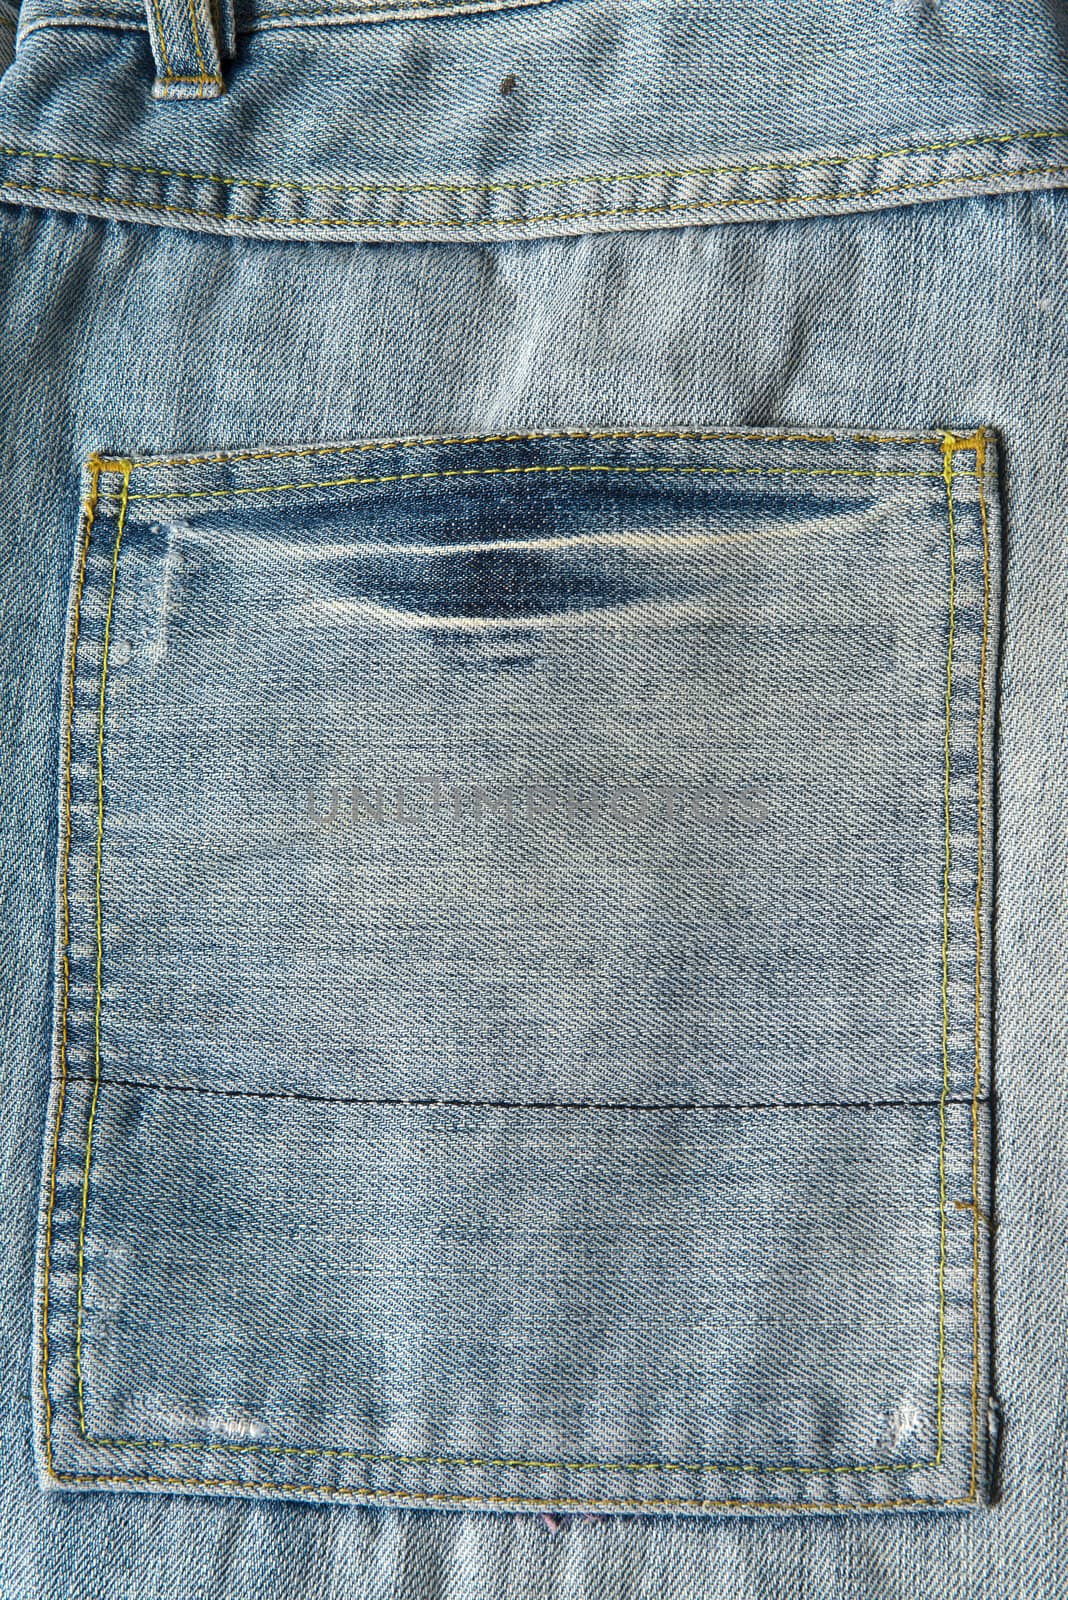 Closeup from the pocket of an old and worn blue jeans